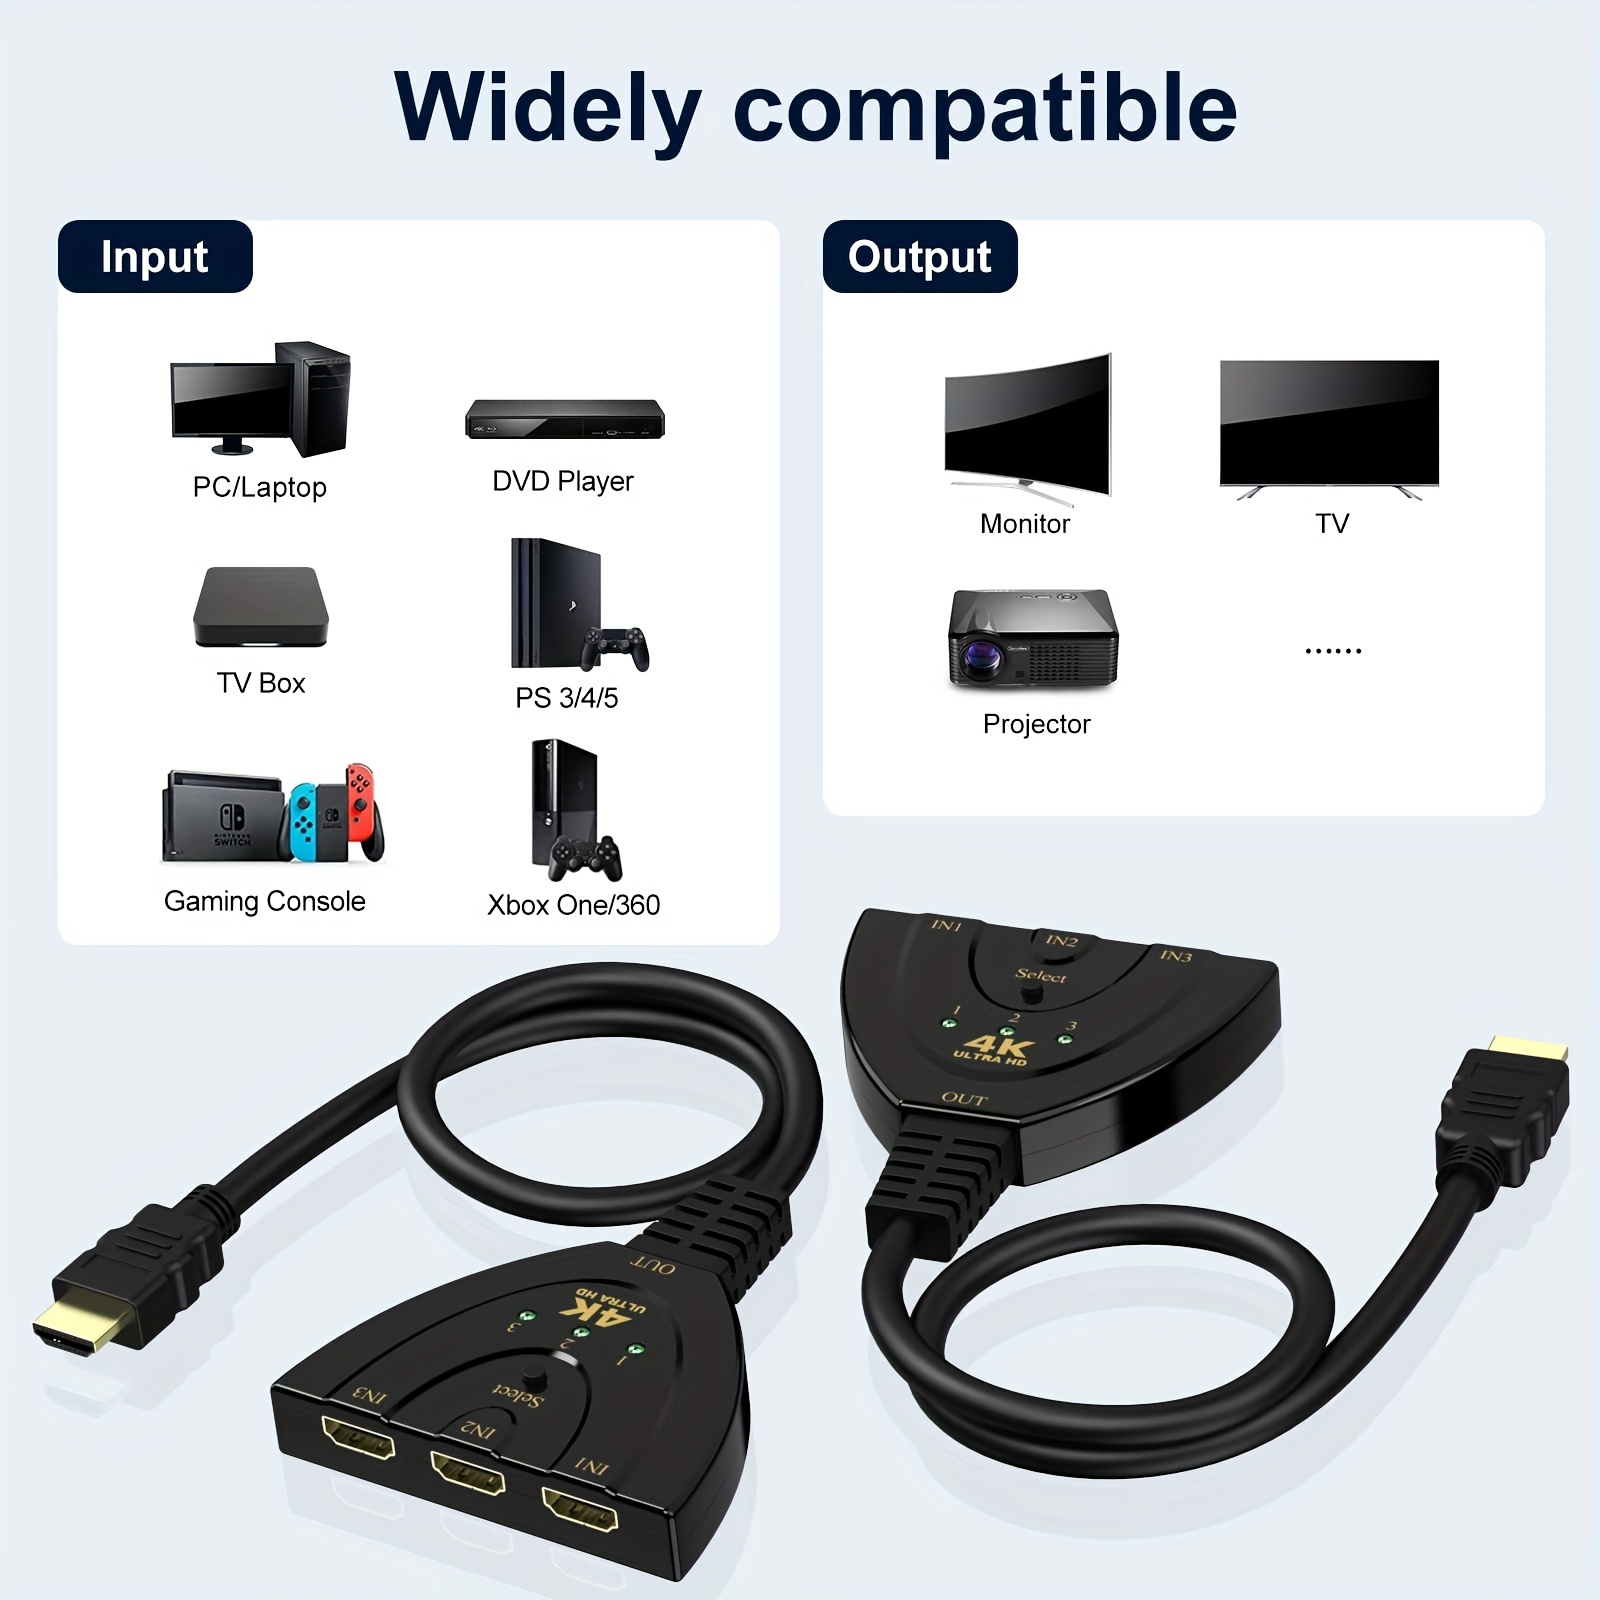 4K@60Hz HDMI Switch, 3 Port 4K HDMI Switcher 3x1 Switch HDMI Splitter  Pigtail Cable Supports Full HD 4K 1080P 3D Player 